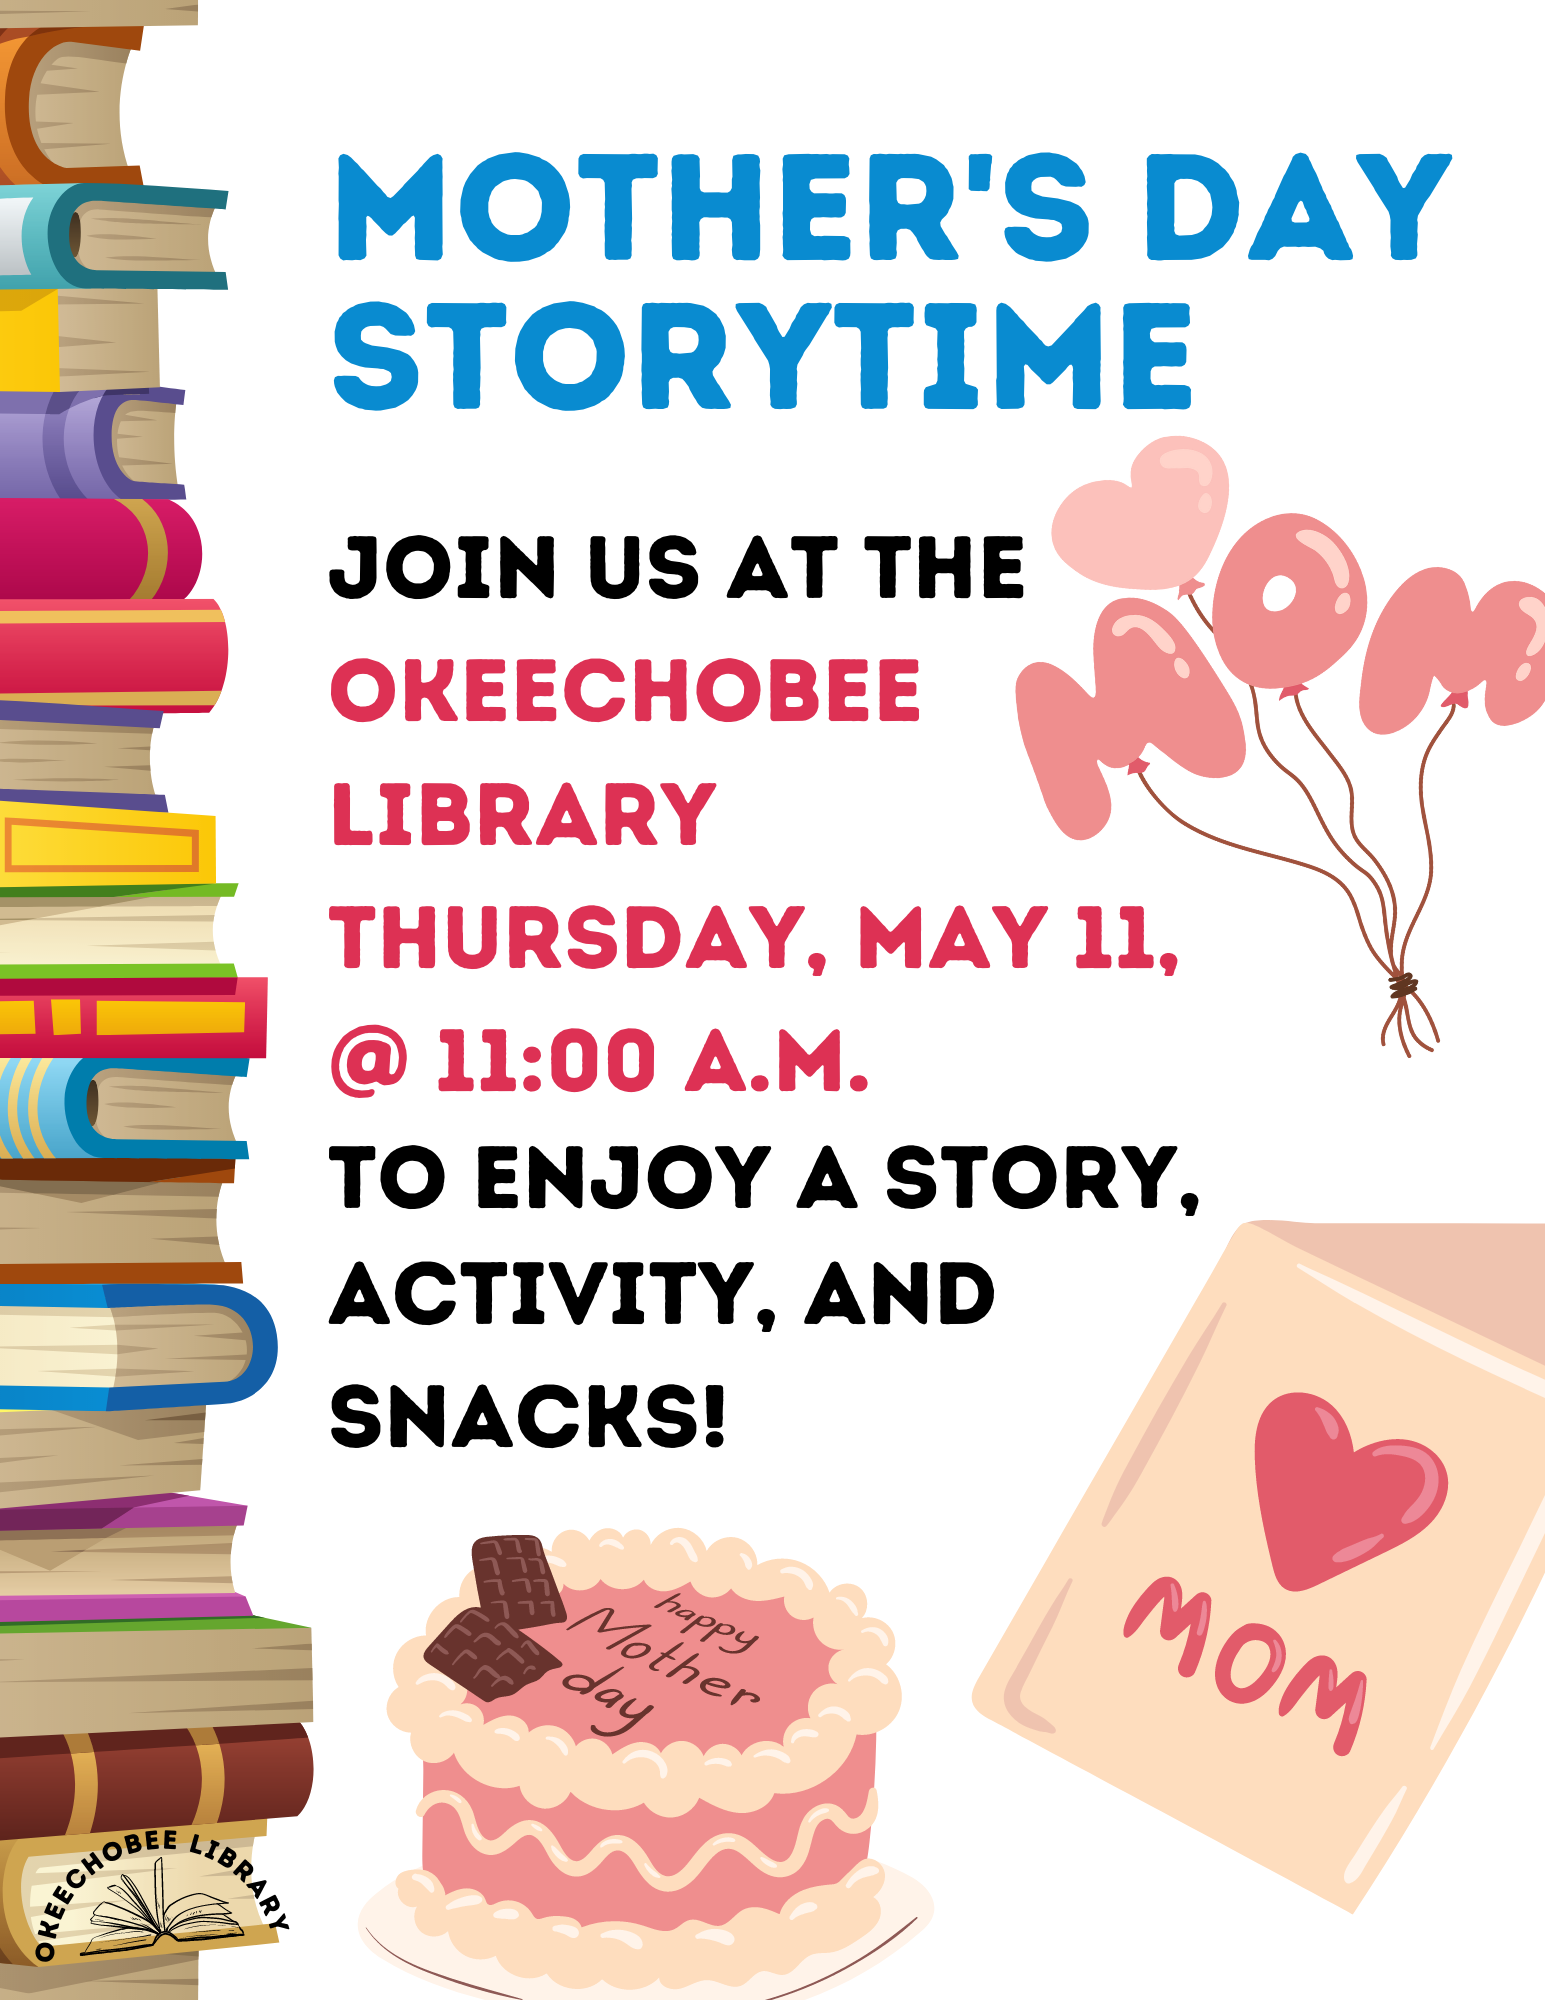 Join us at the Okeechobee Library on May 11th at 11:00 A.M. for our Mother's Day Story Time! Come enjoy a story, a simple activity, and fun snacks!